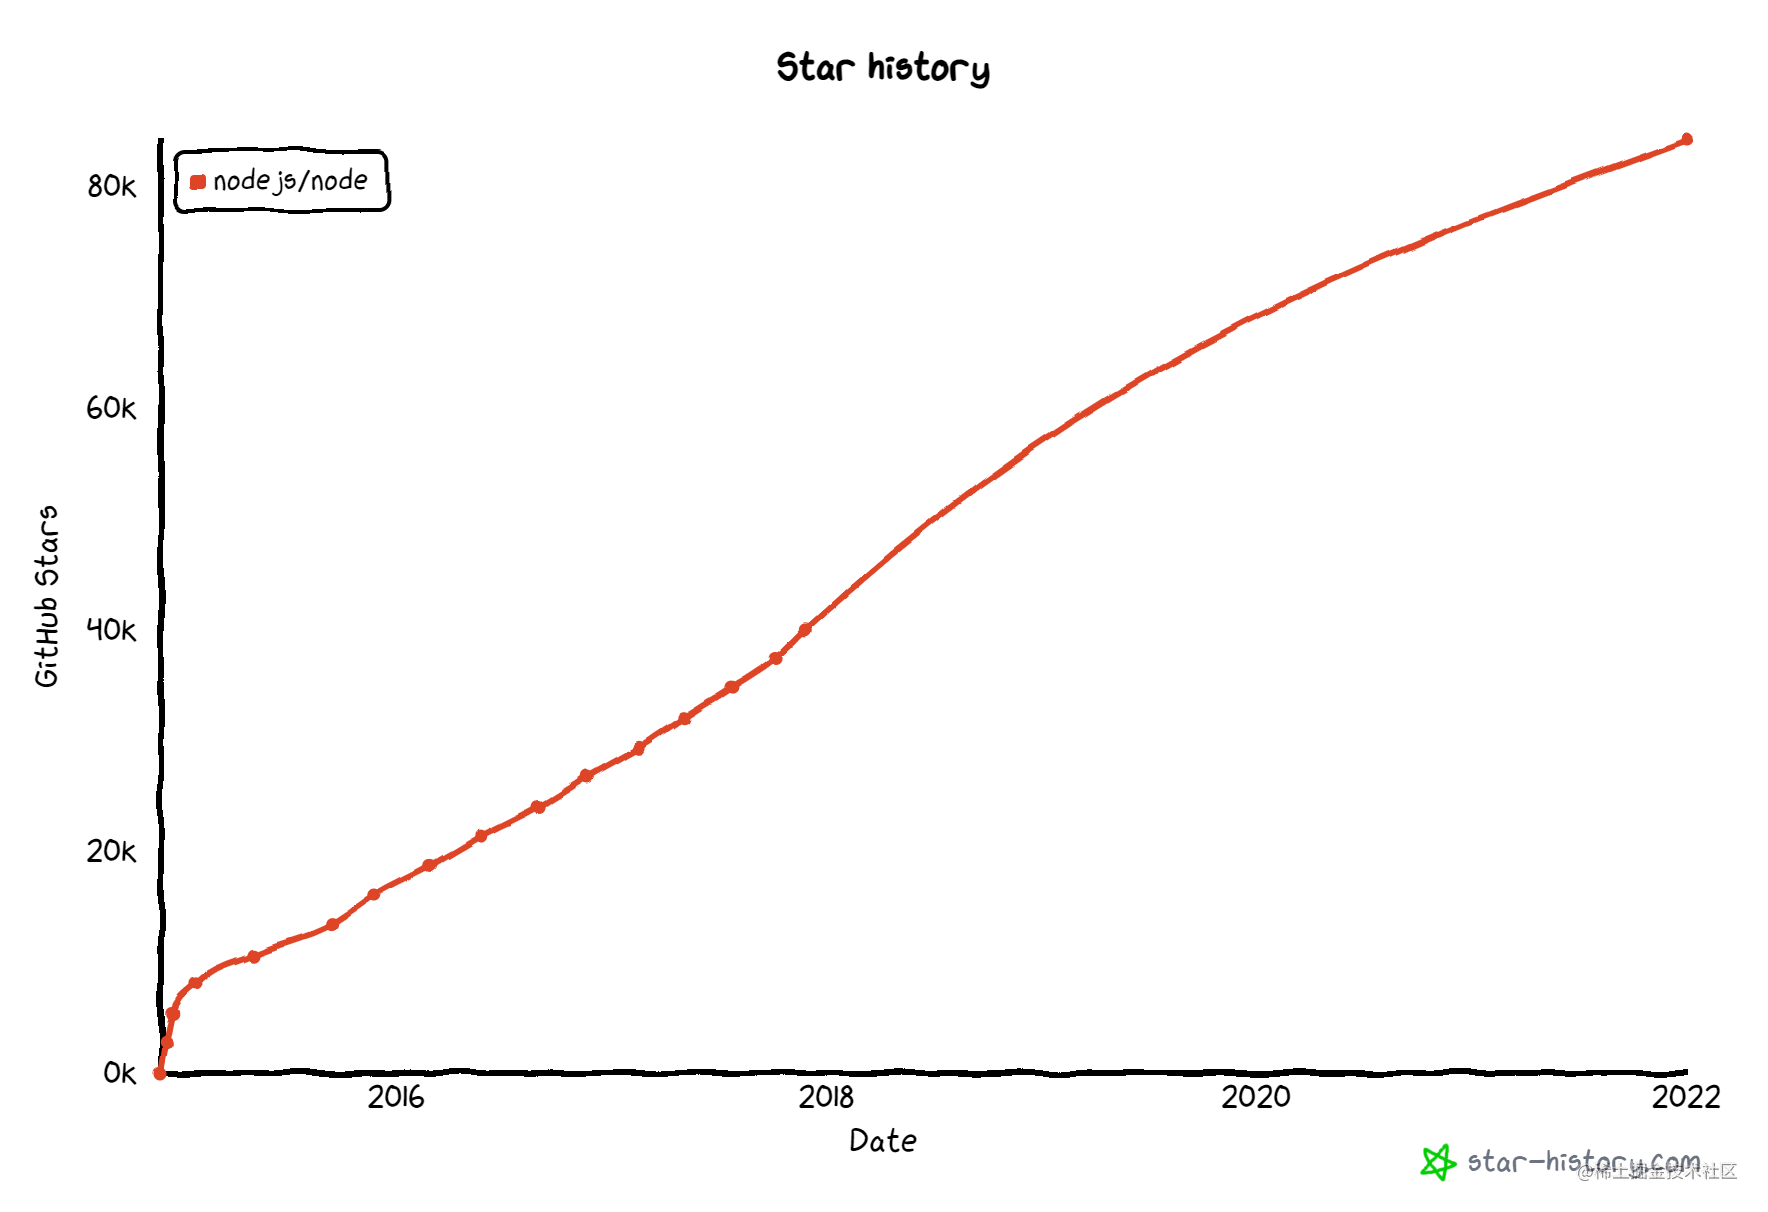 star-history-202215 (1).png